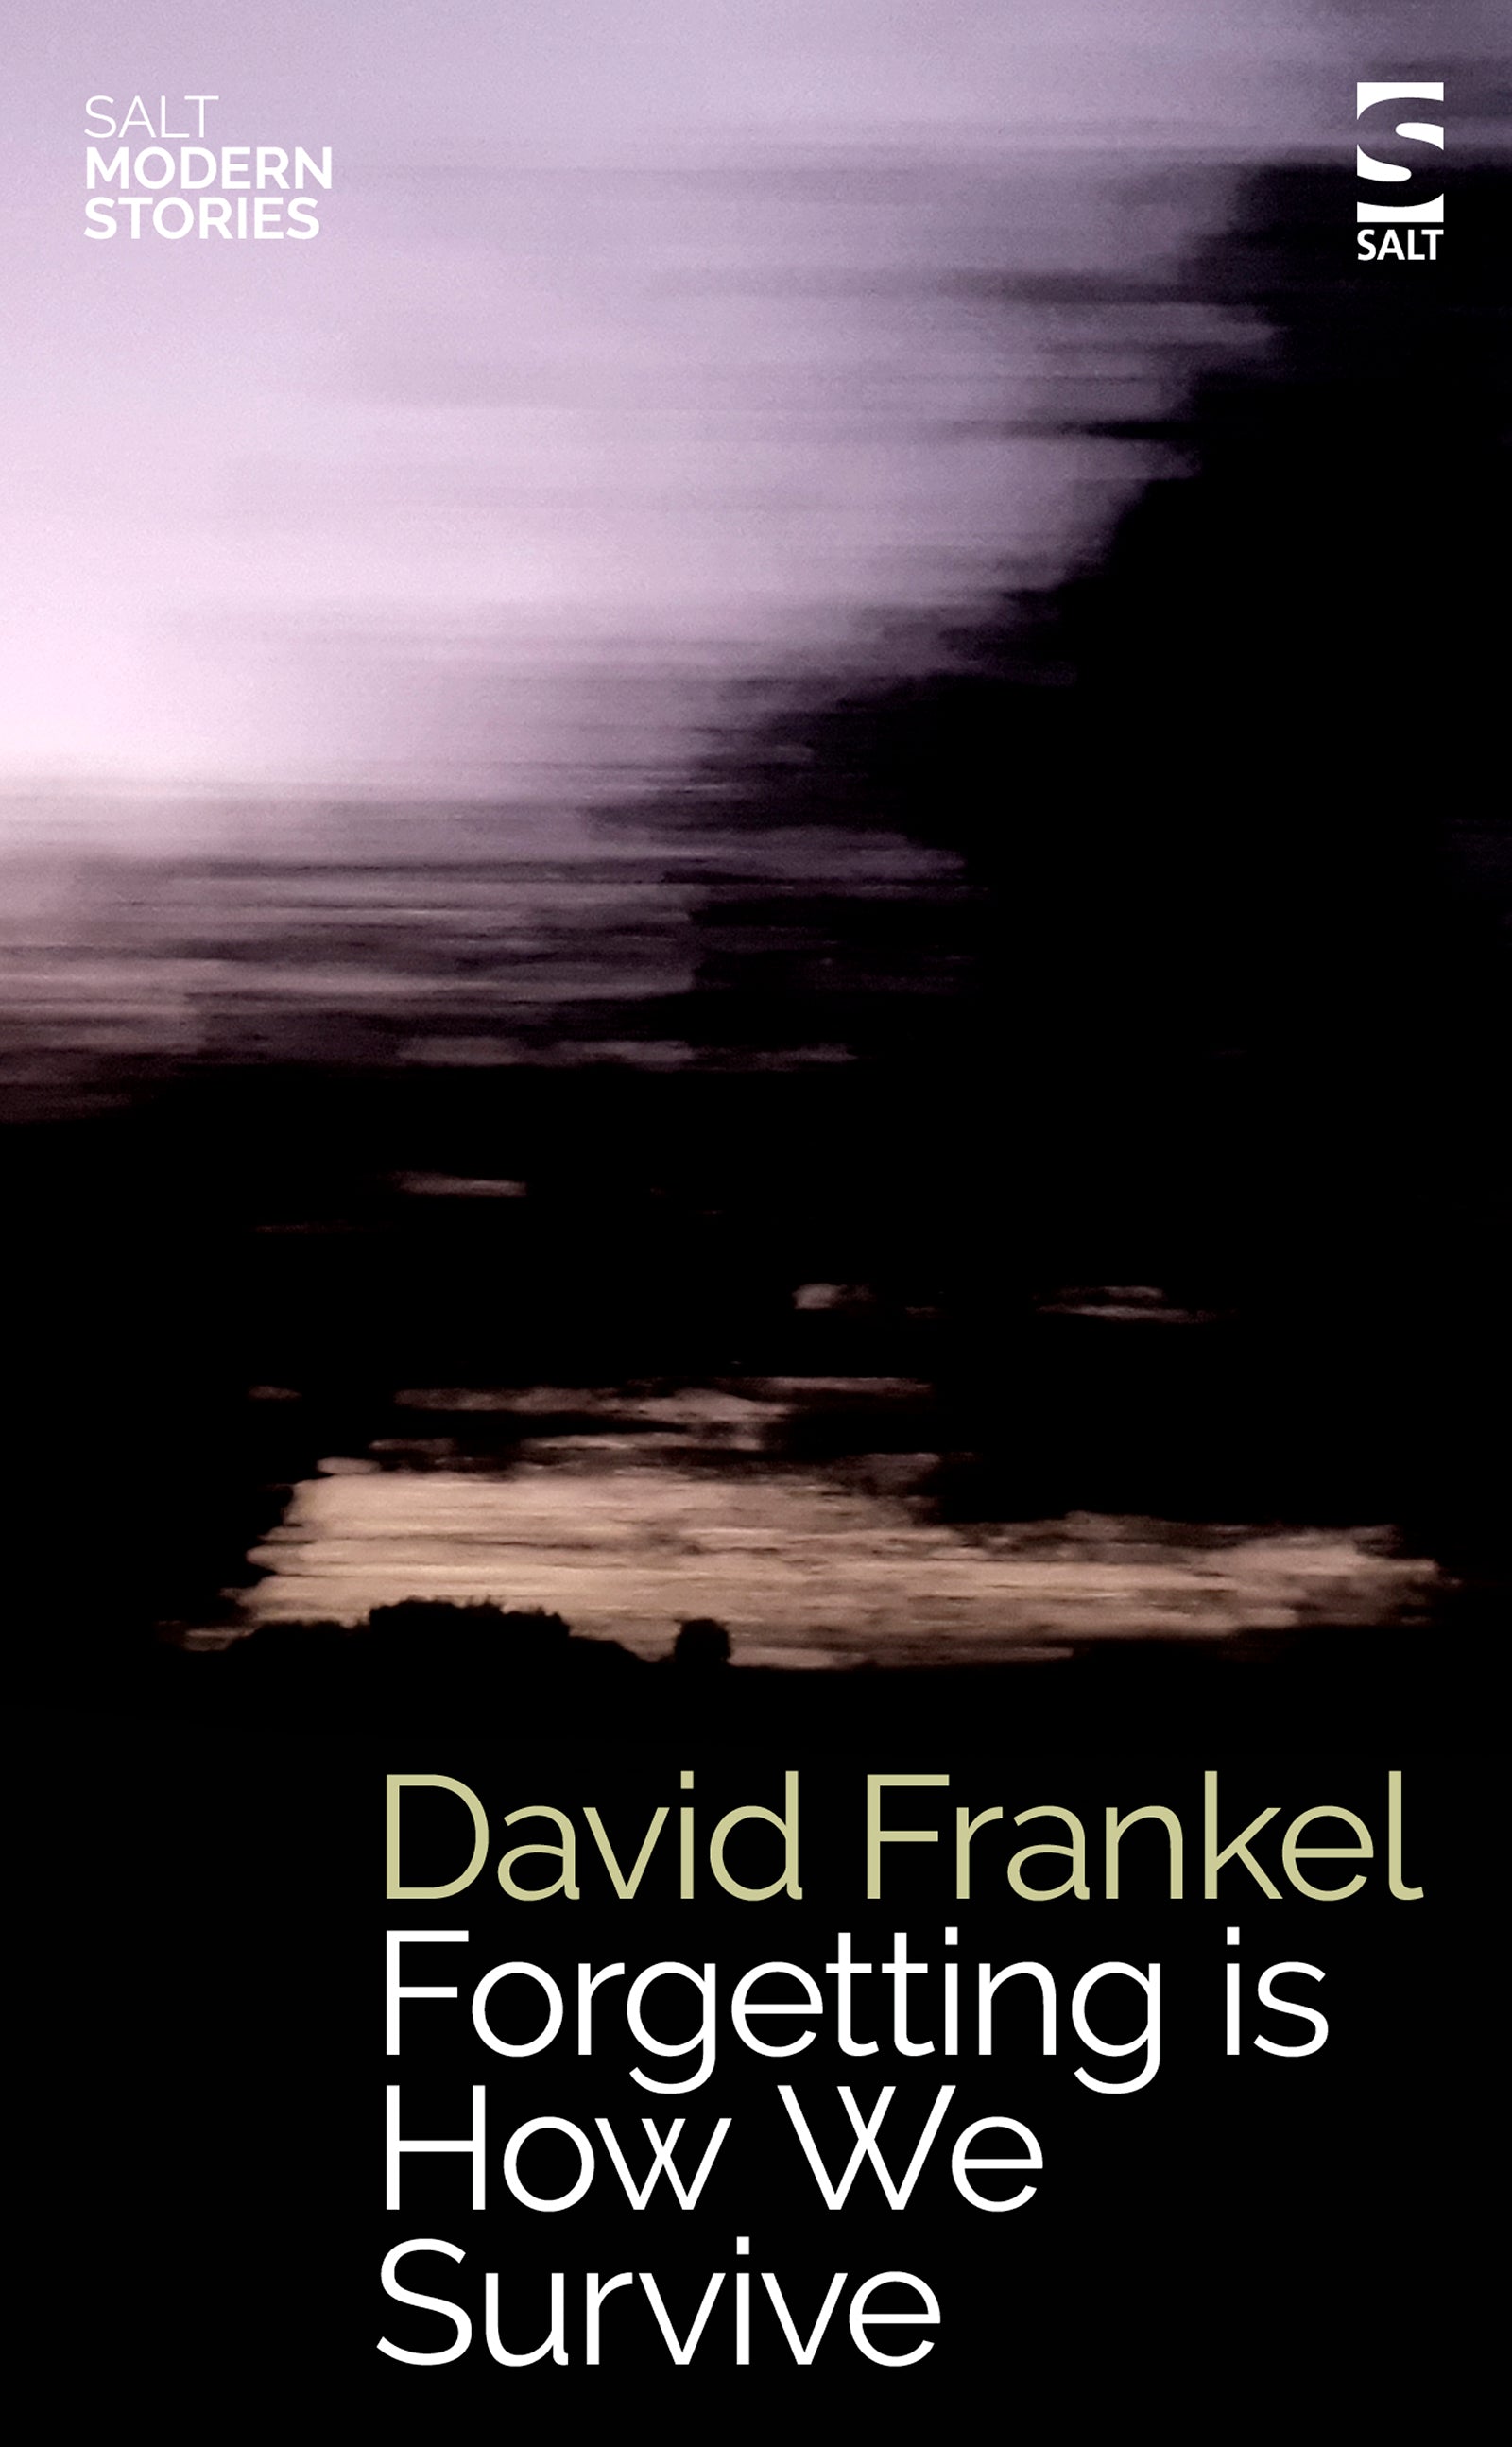 Forgetting is How We Survive by David Frankel